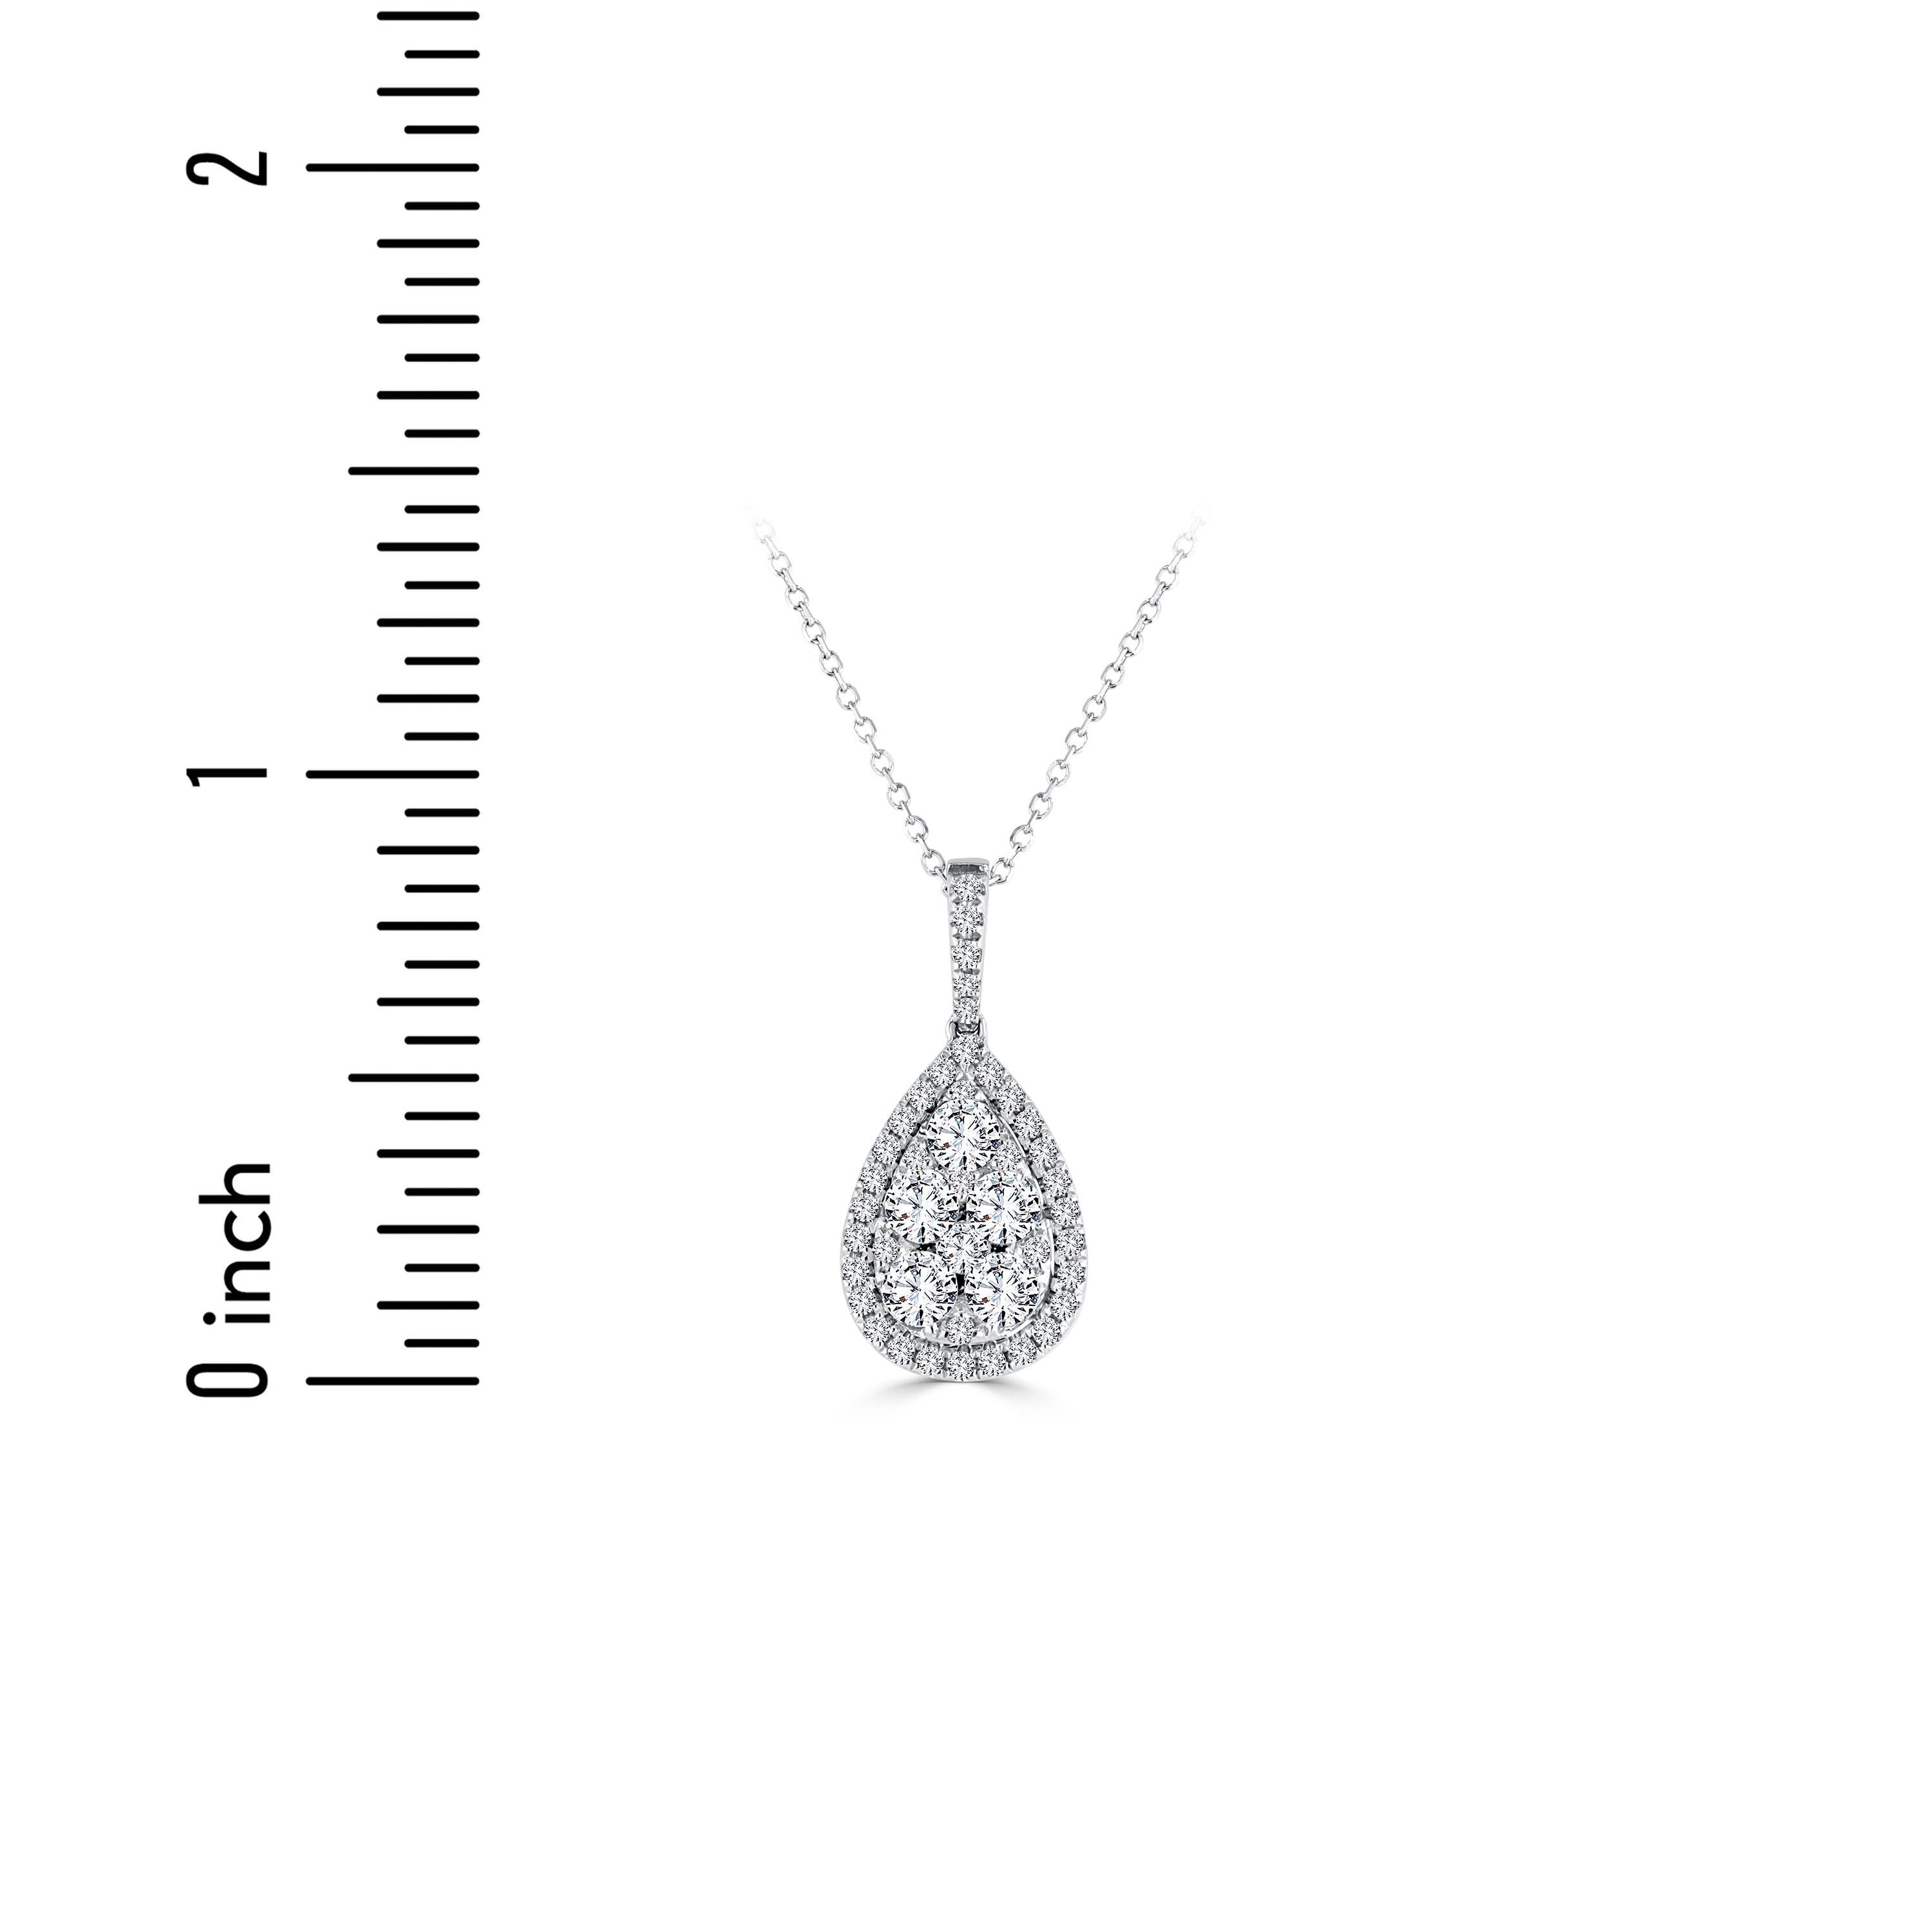 Round Cut 0.76 Carat Total Diamond Weight Pear Illusion Pendant in 14k White Gold ref2331 For Sale